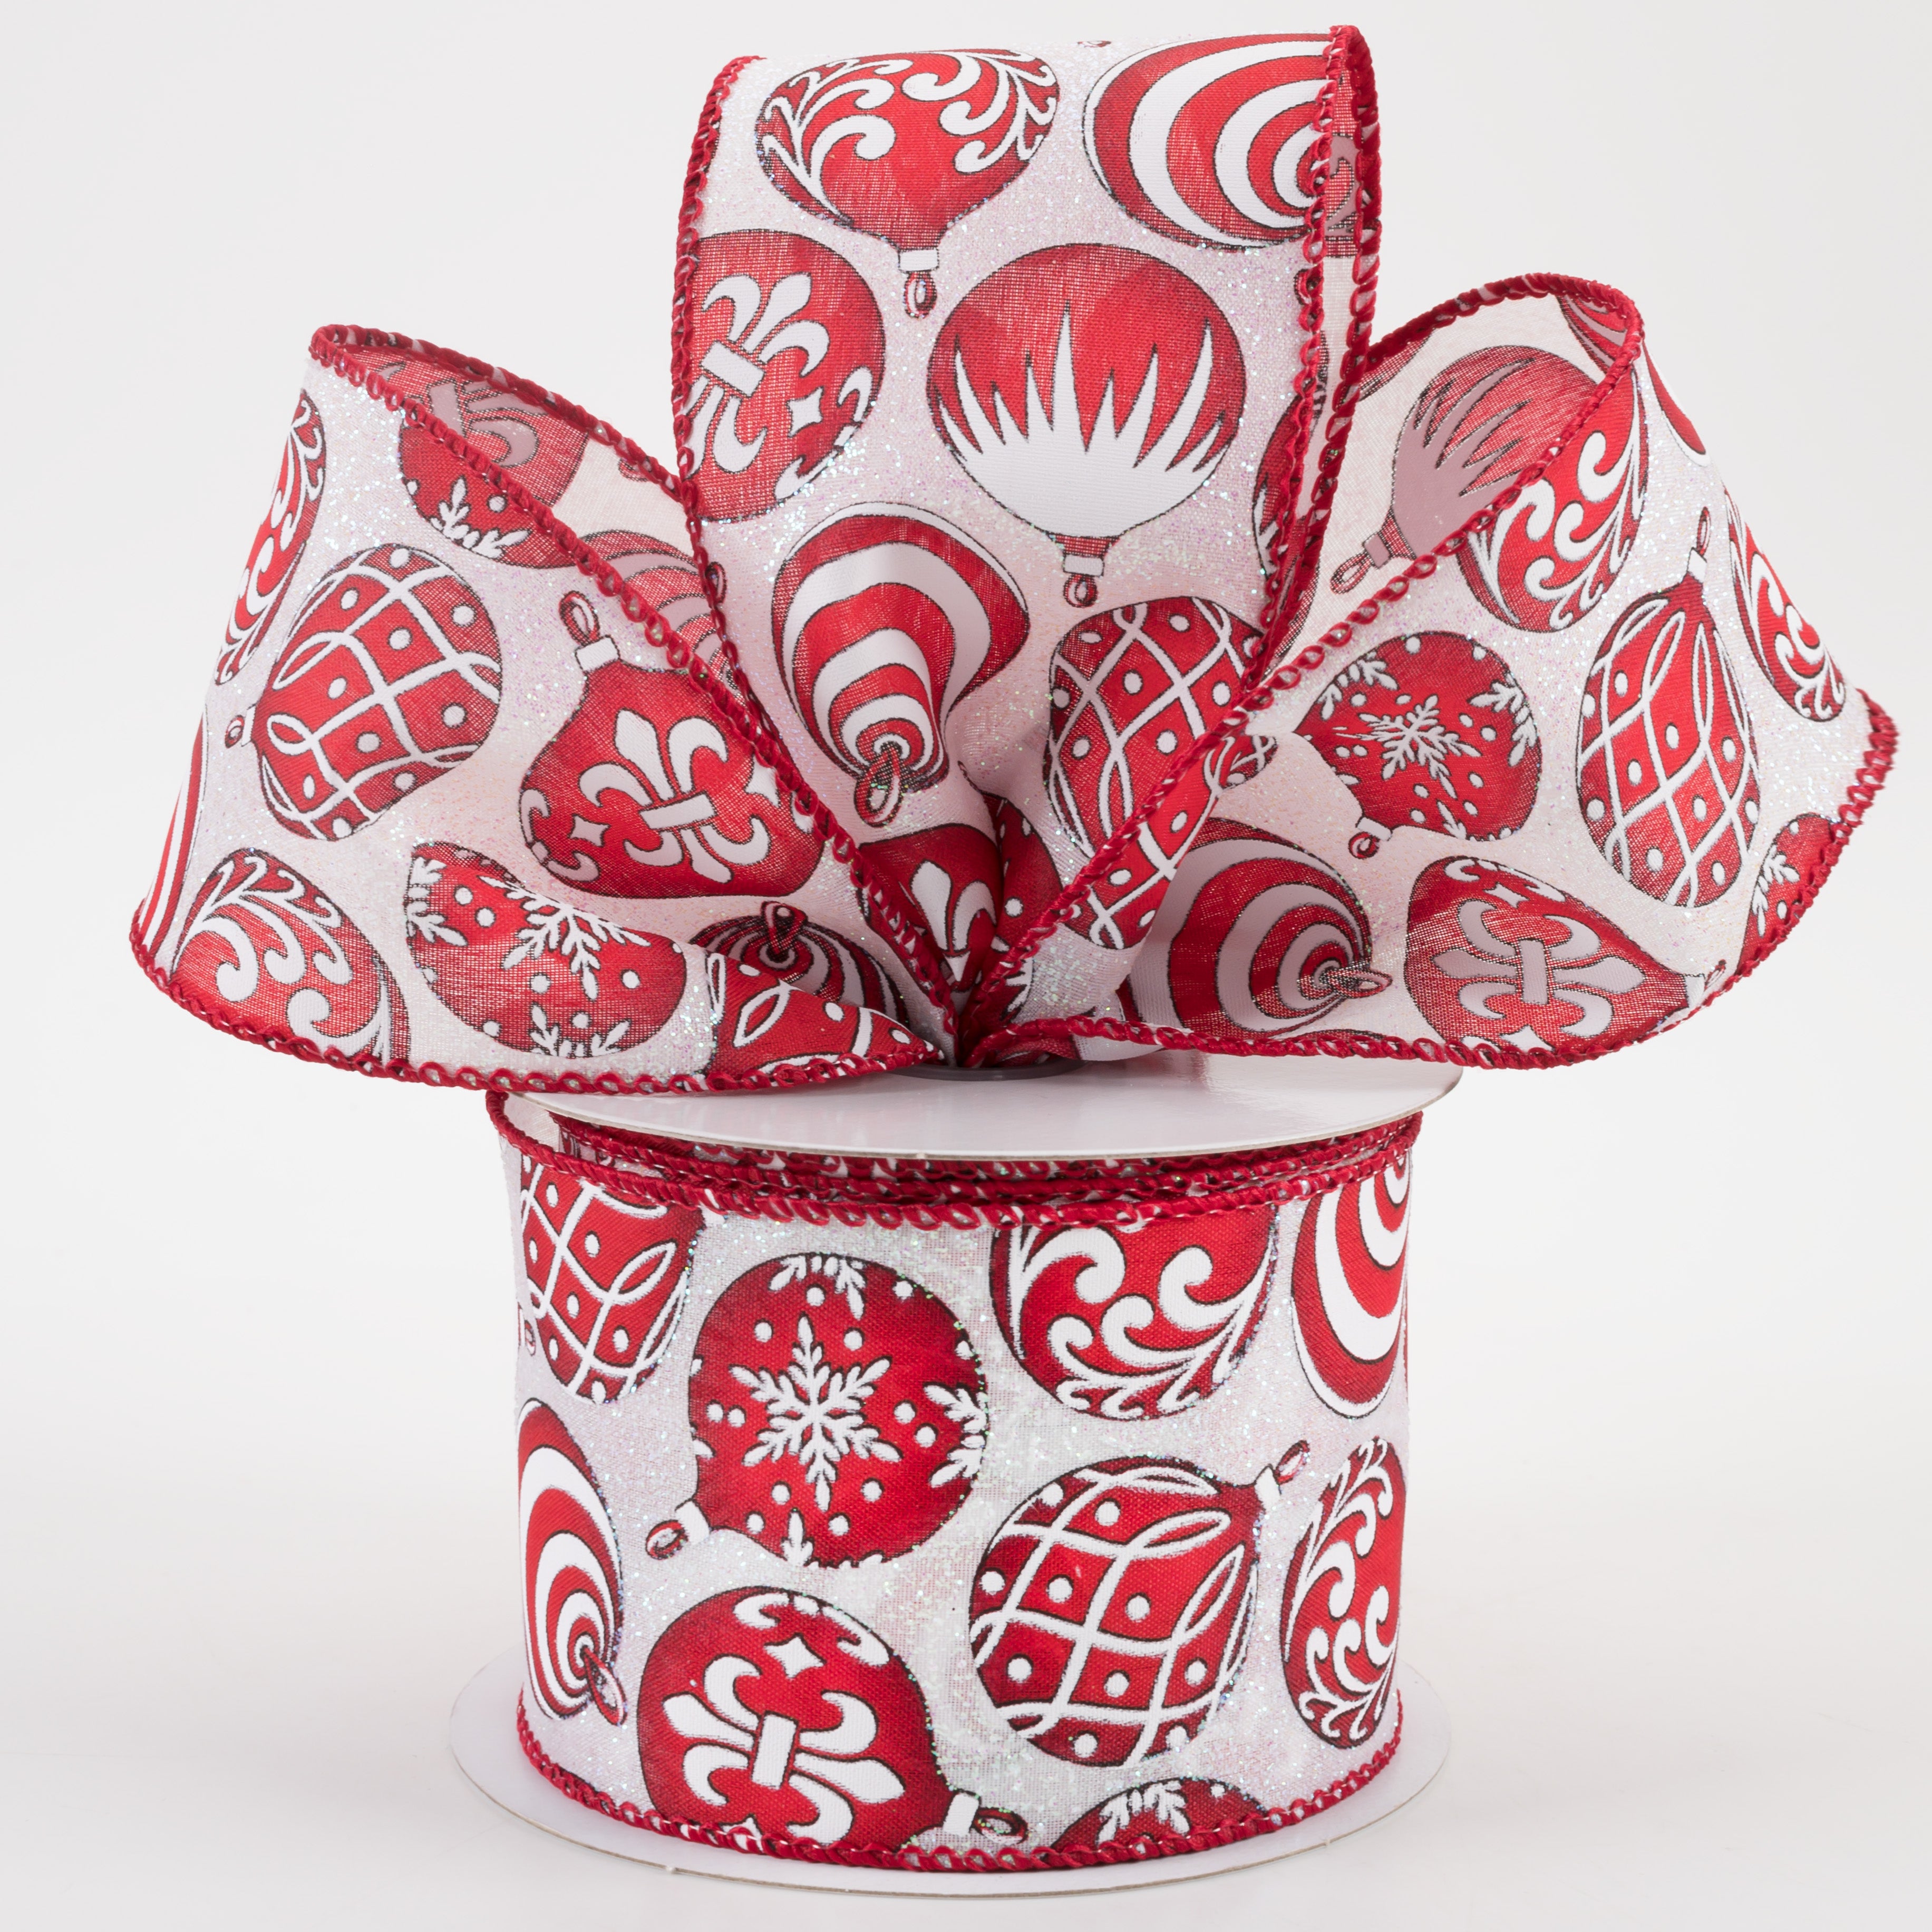 2.5" Red & White Ornaments on Iridescent Ribbon (10 yards)